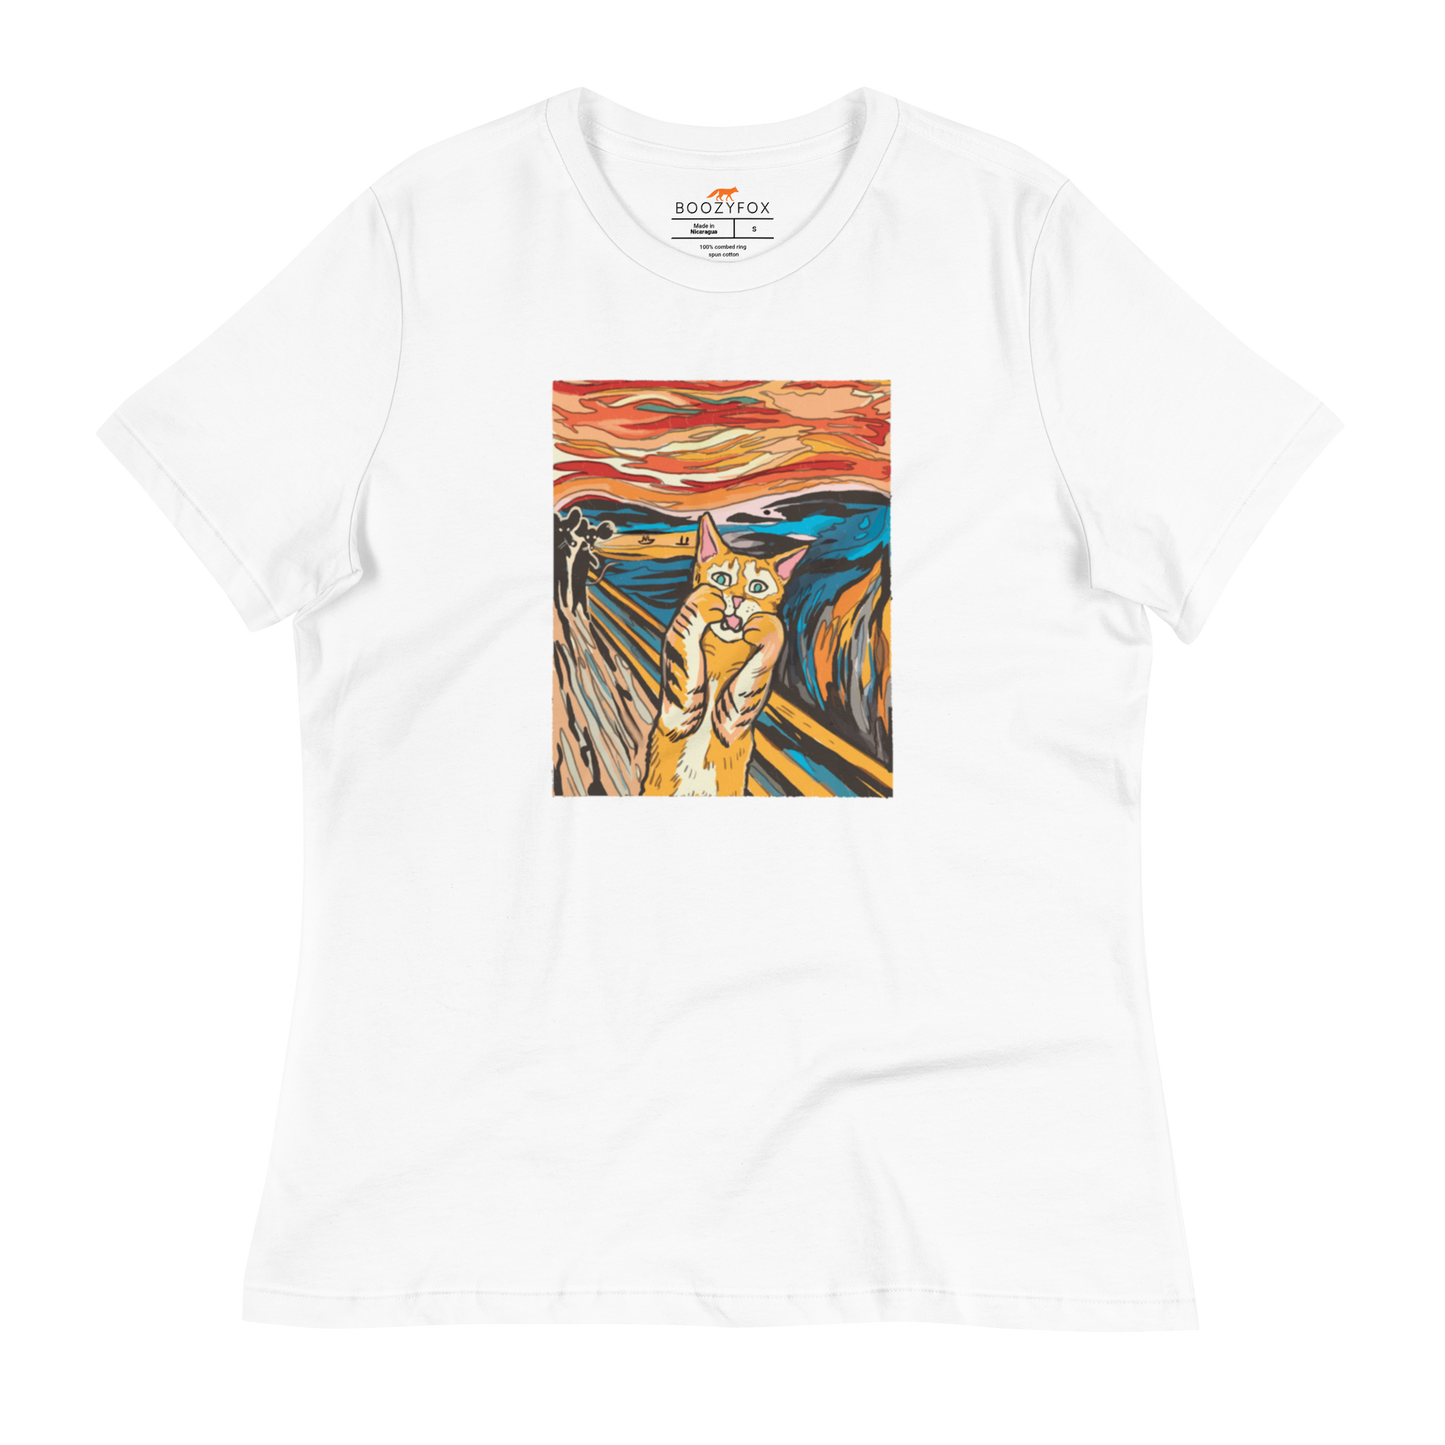 Women's relaxed white screaming cat t-shirt showcasing iconic The Screaming Cat graphic on the chest - Women's Graphic Cat Tees - Boozy Fox